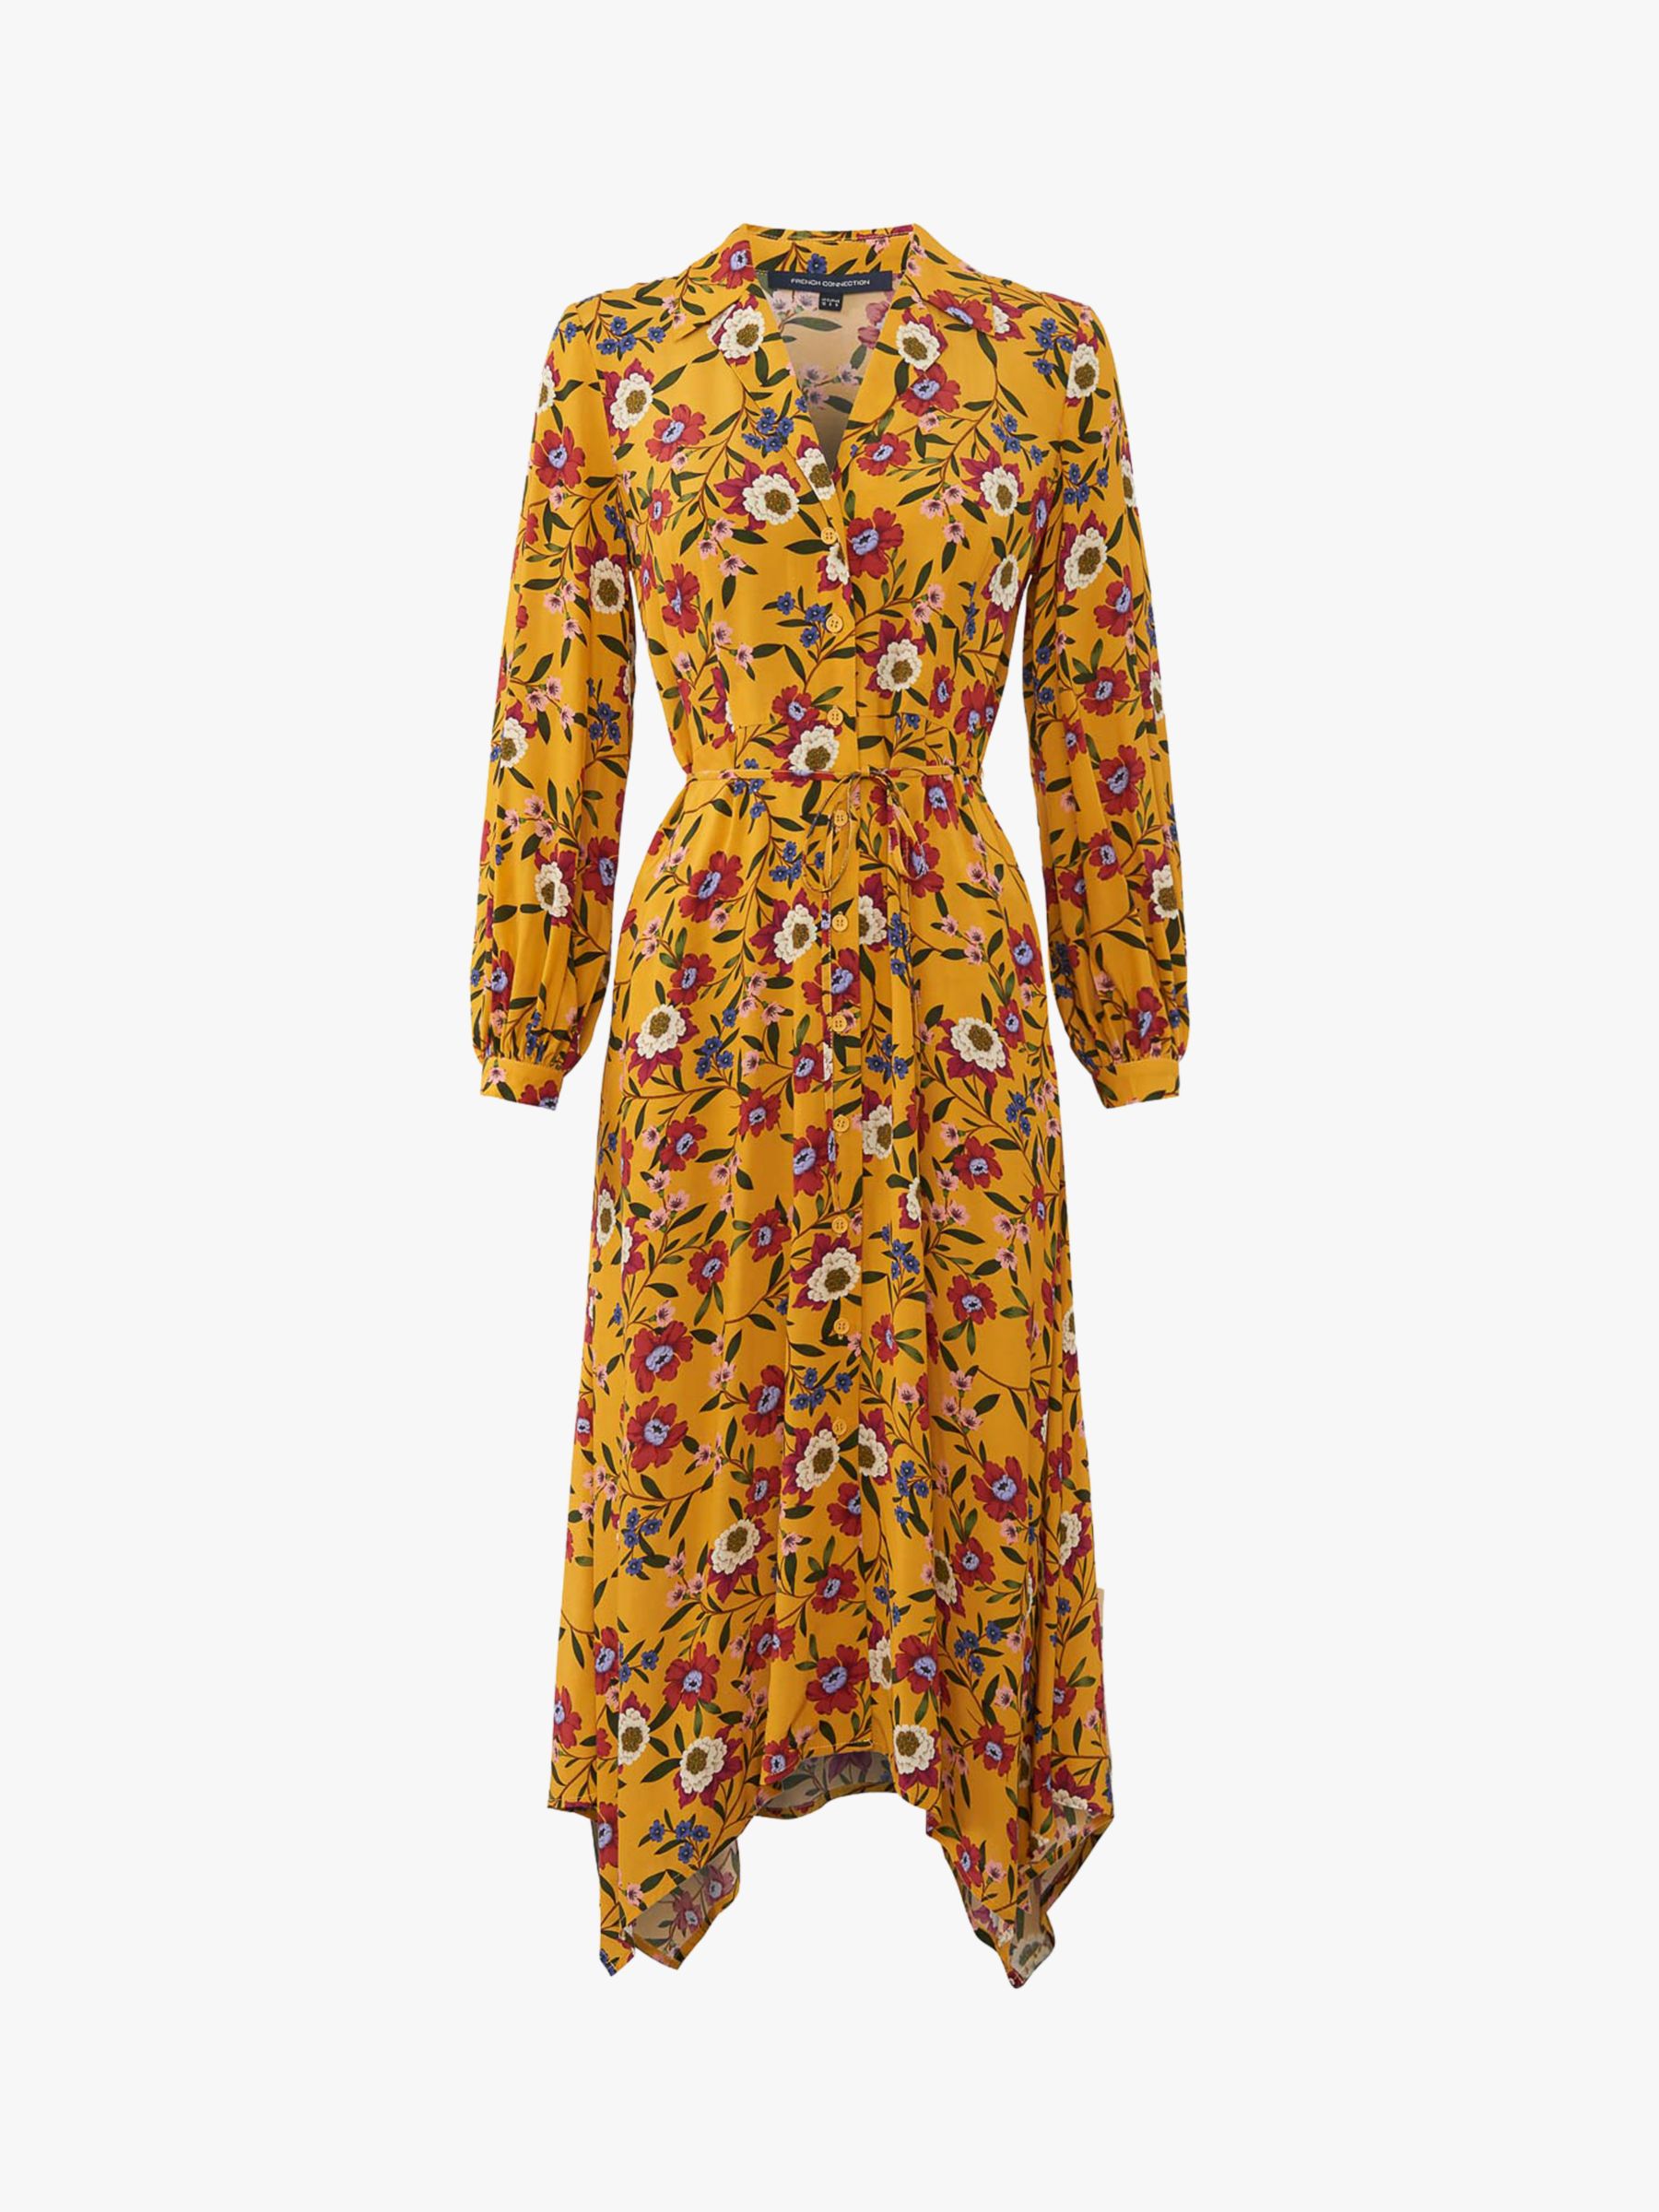 French Connection Eloise Doto Drape Floral Dress, Mustard/Multi